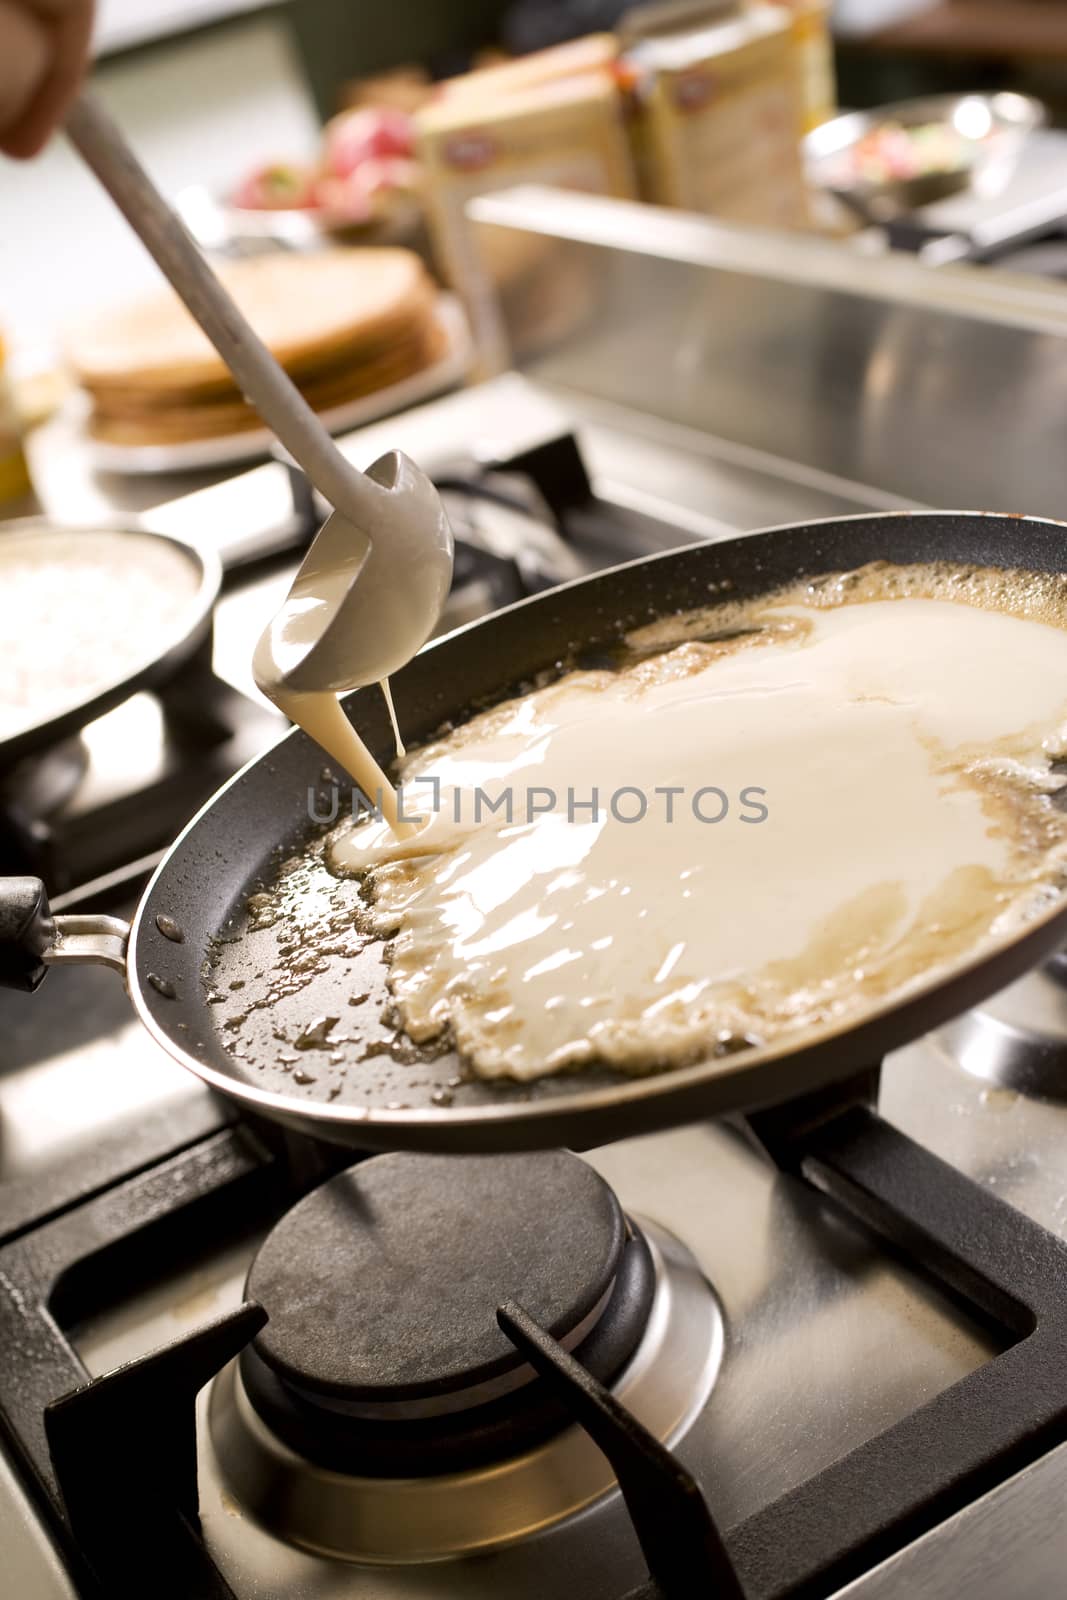 pancakes cooking on the hot stove griddle. Shallow depth of fiel by janssenkruseproductions